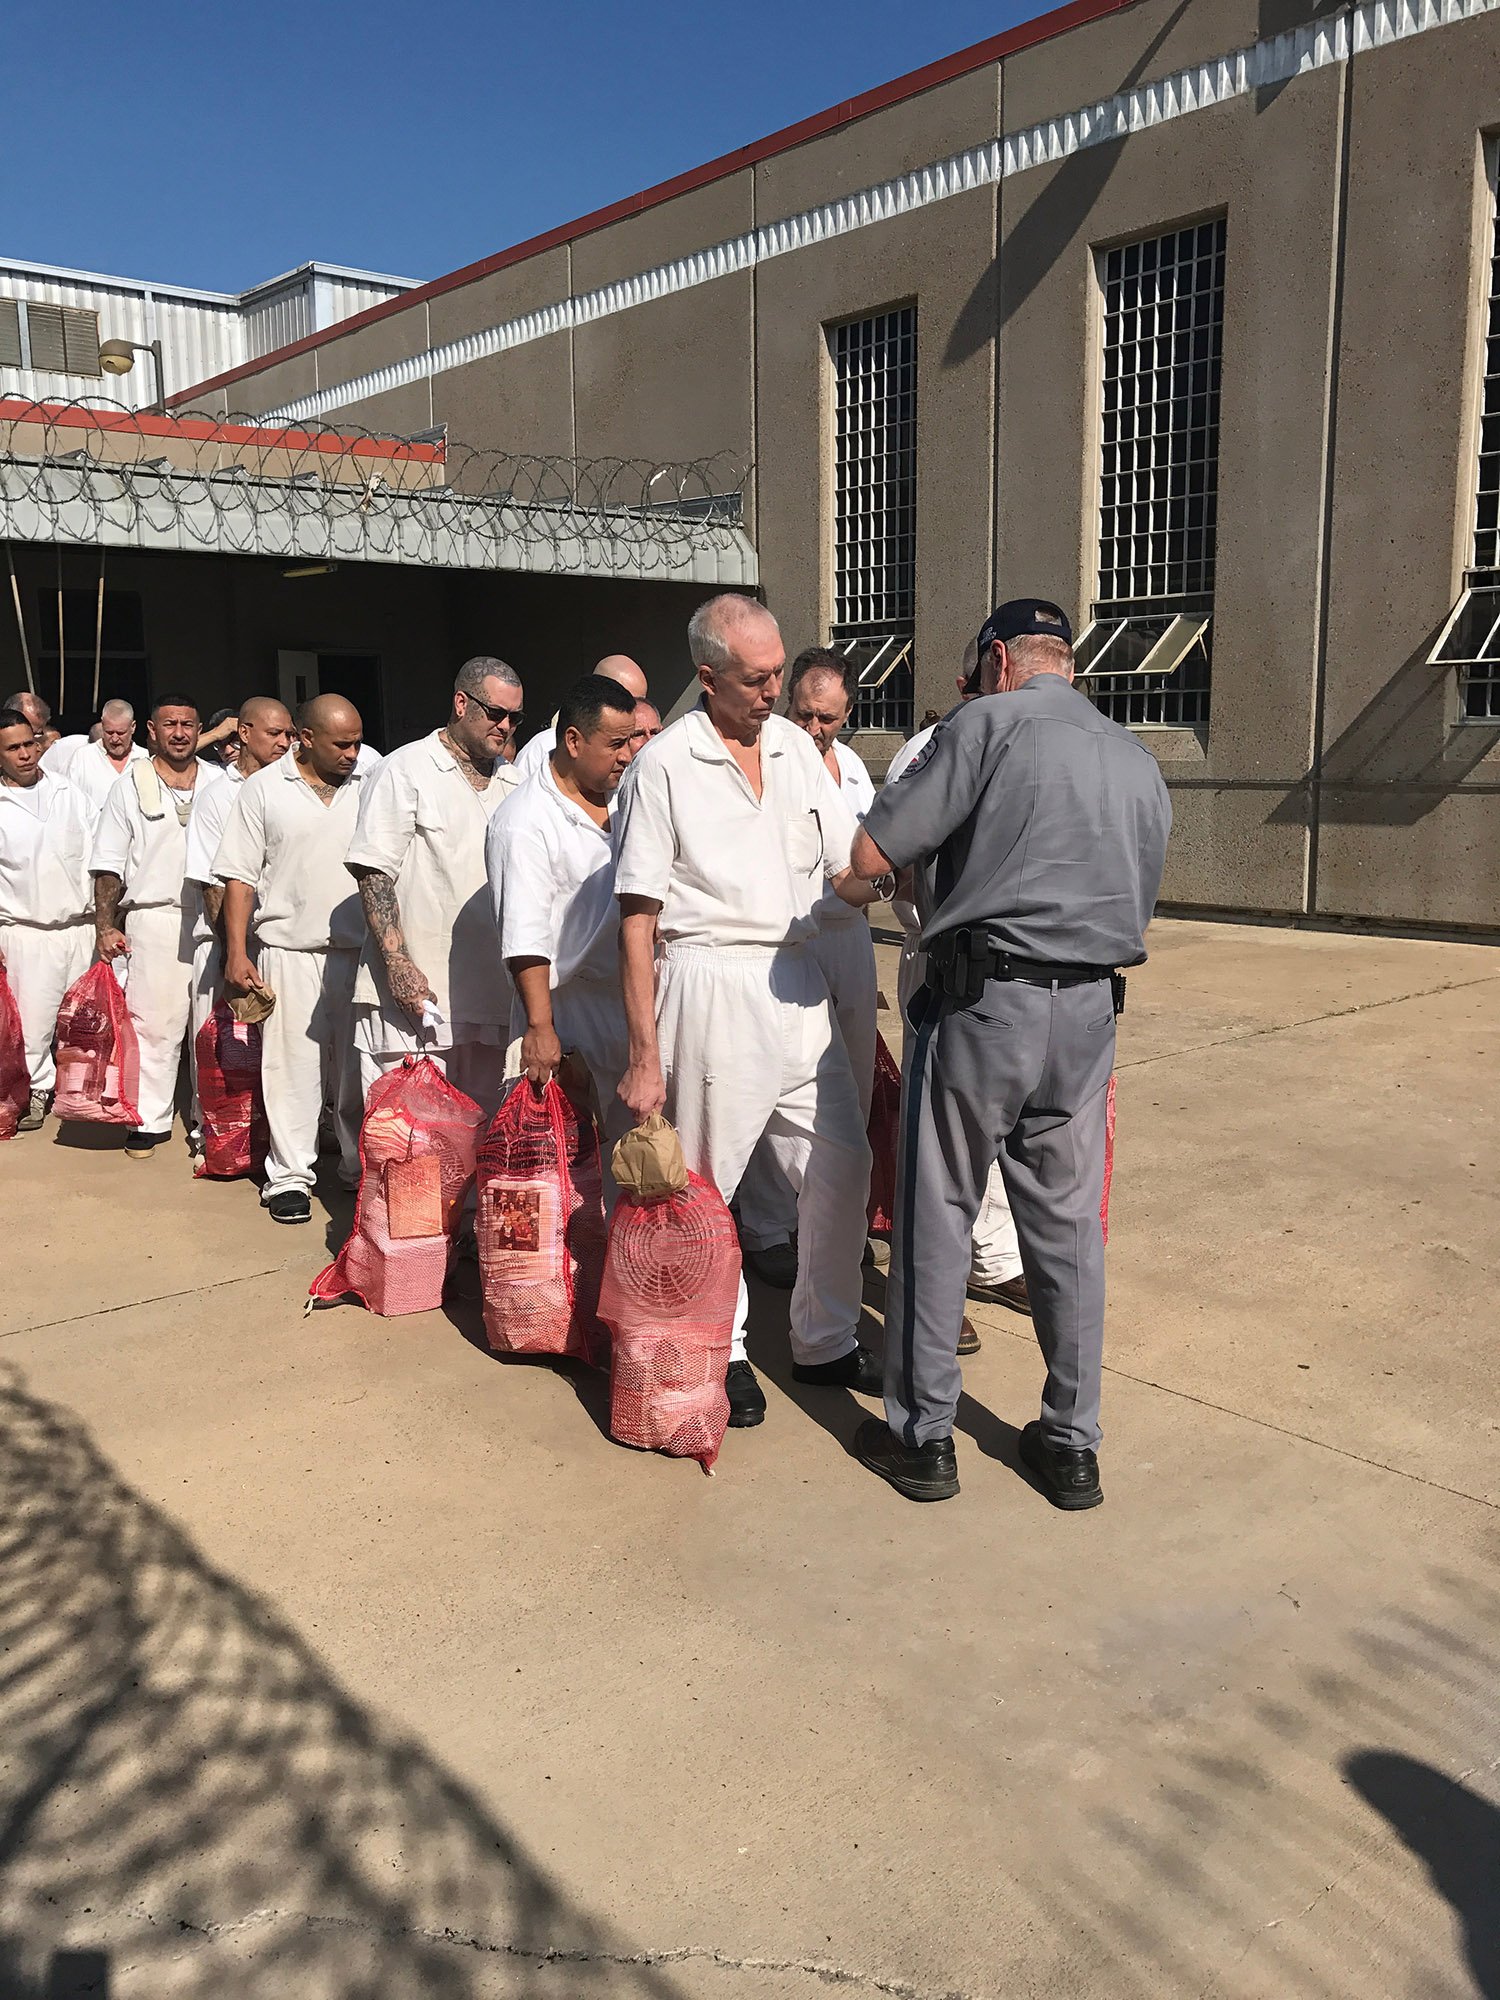 Inmates return to the Texas Department of Criminal Justice's Ramsey and Terrell units from the Estelle Unit on Sept. 16. Prisoners were evacuated from state prisons in Brazoria County during flooding from Hurricane Harvey.